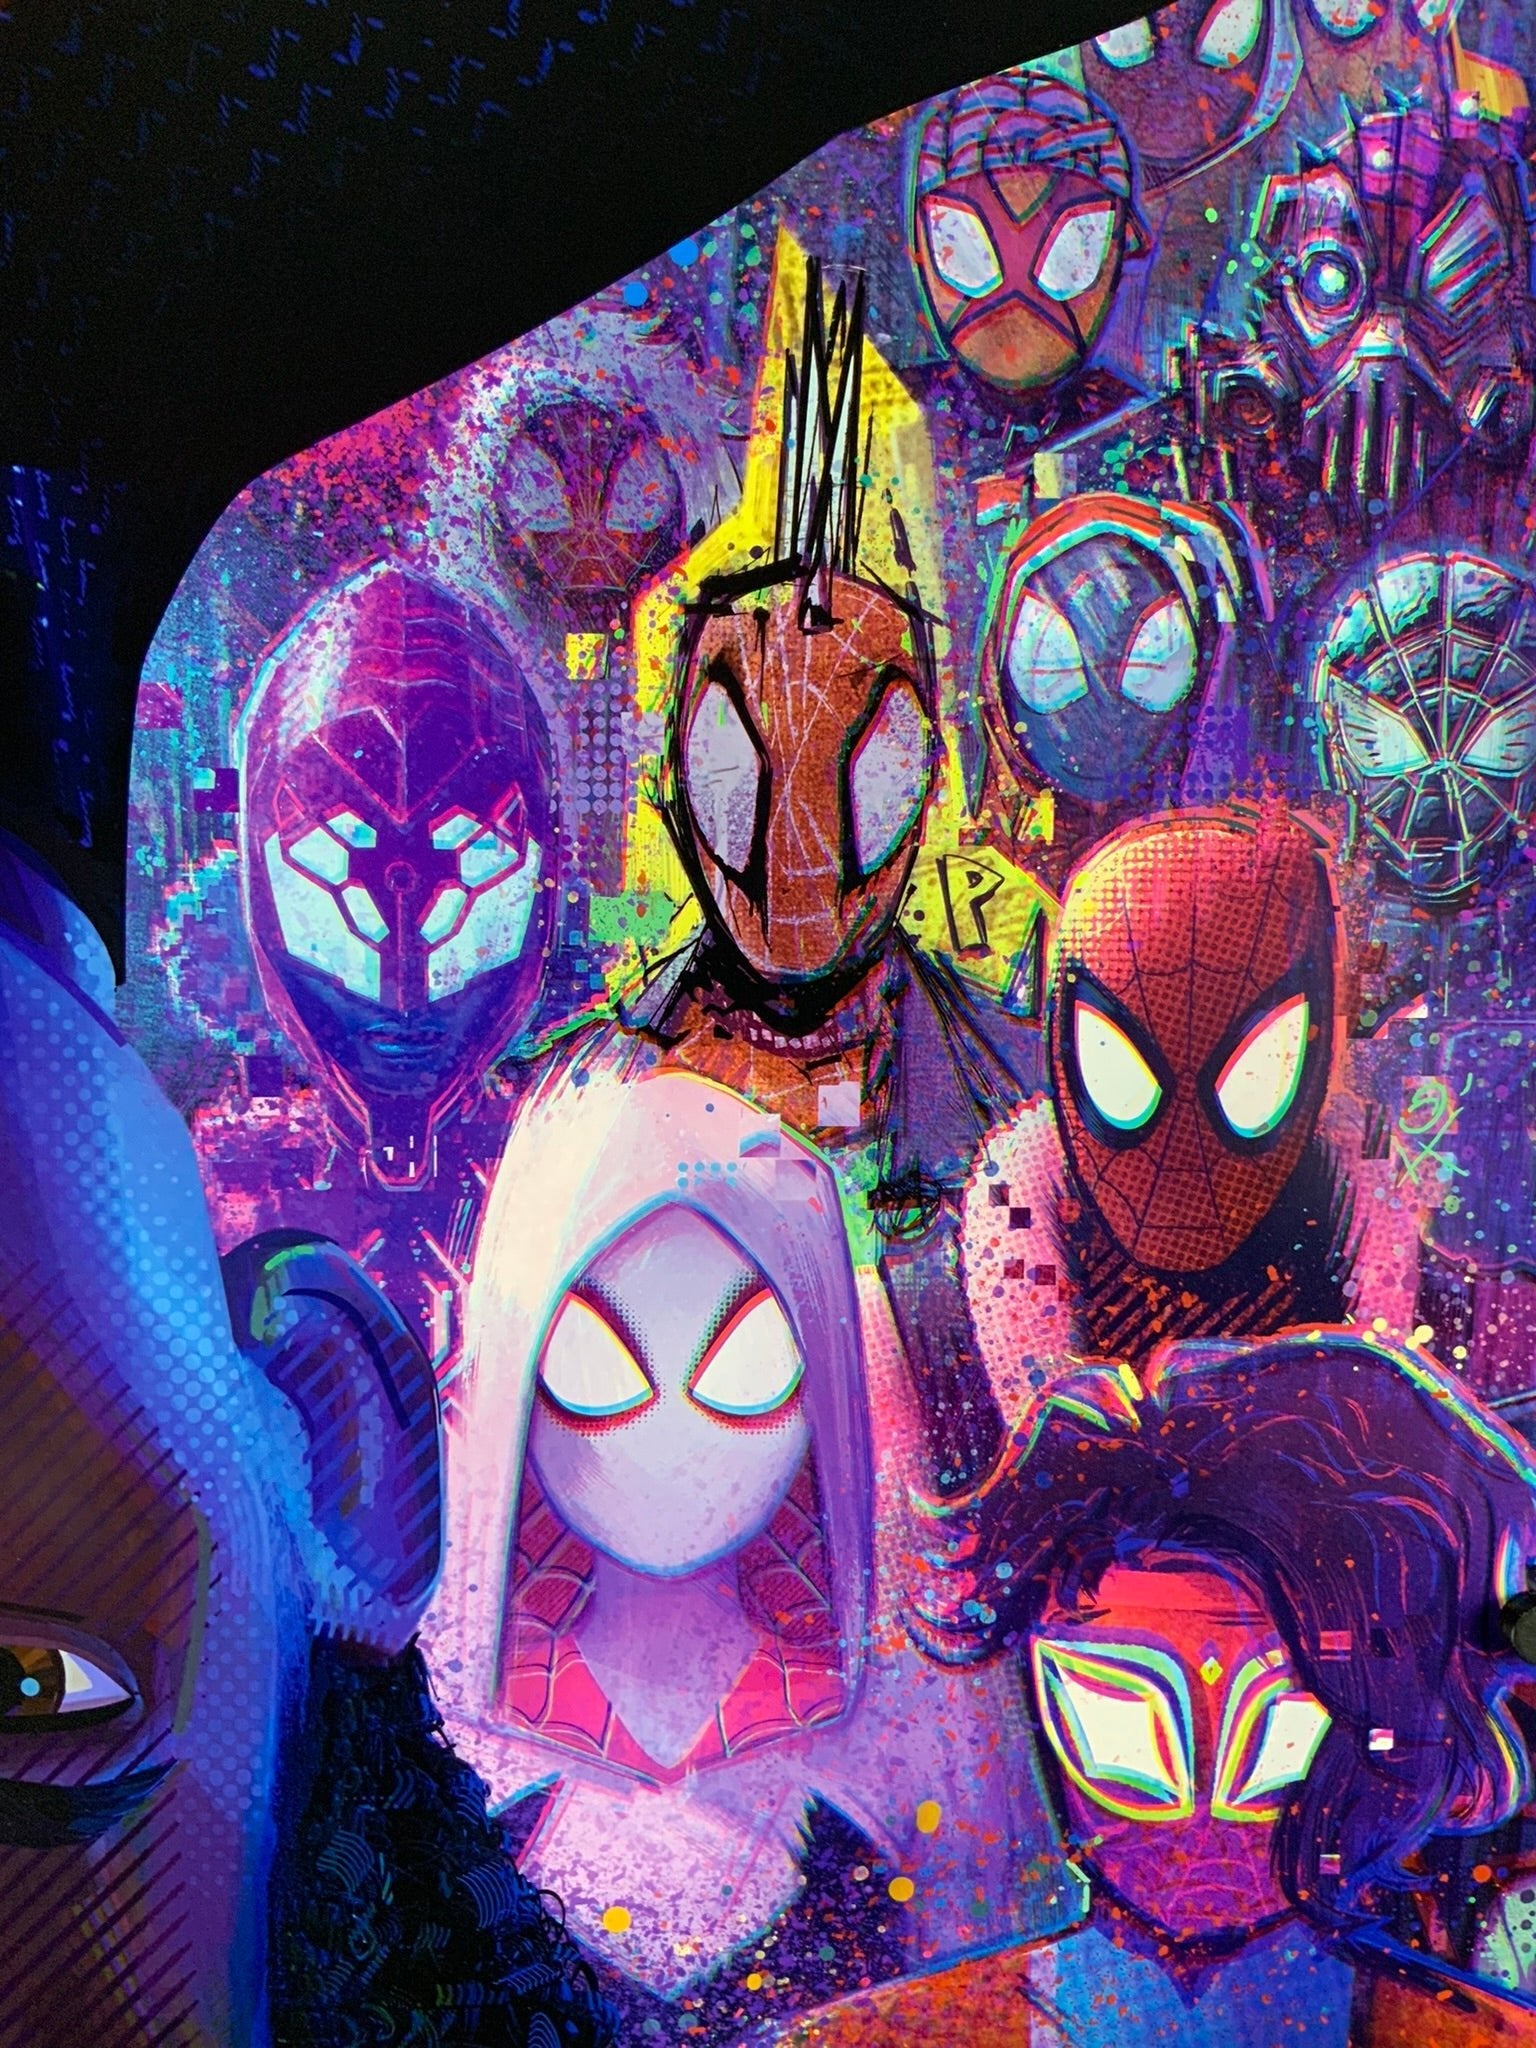 Spider-Man Across the Spider-Verse DS Theatrical Movie Poster